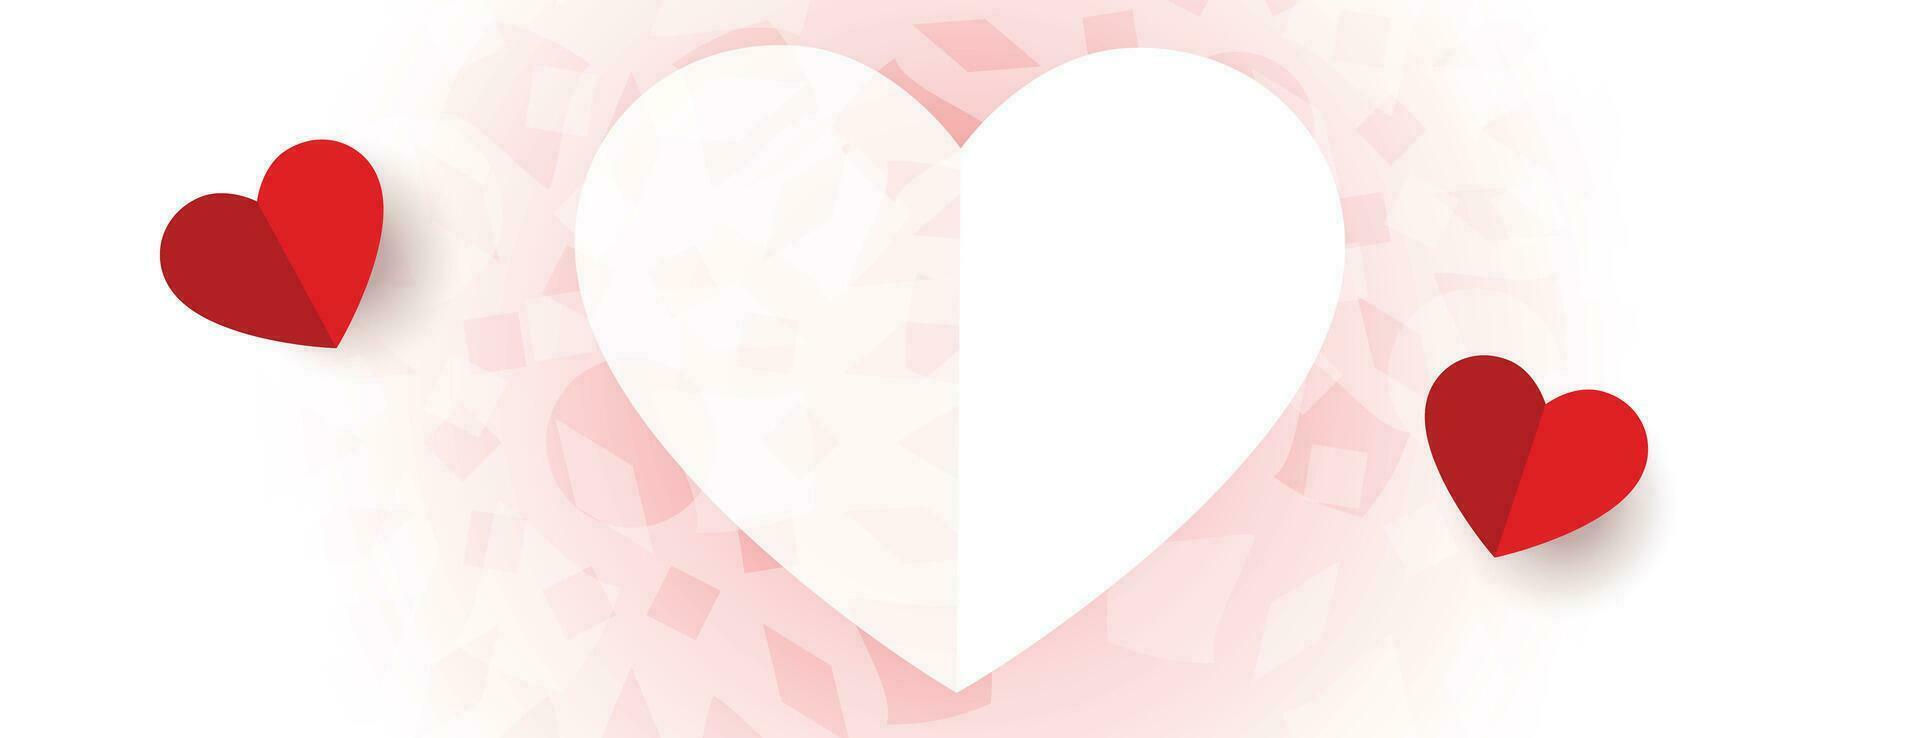 beautiful hearts valentines day banner design vector